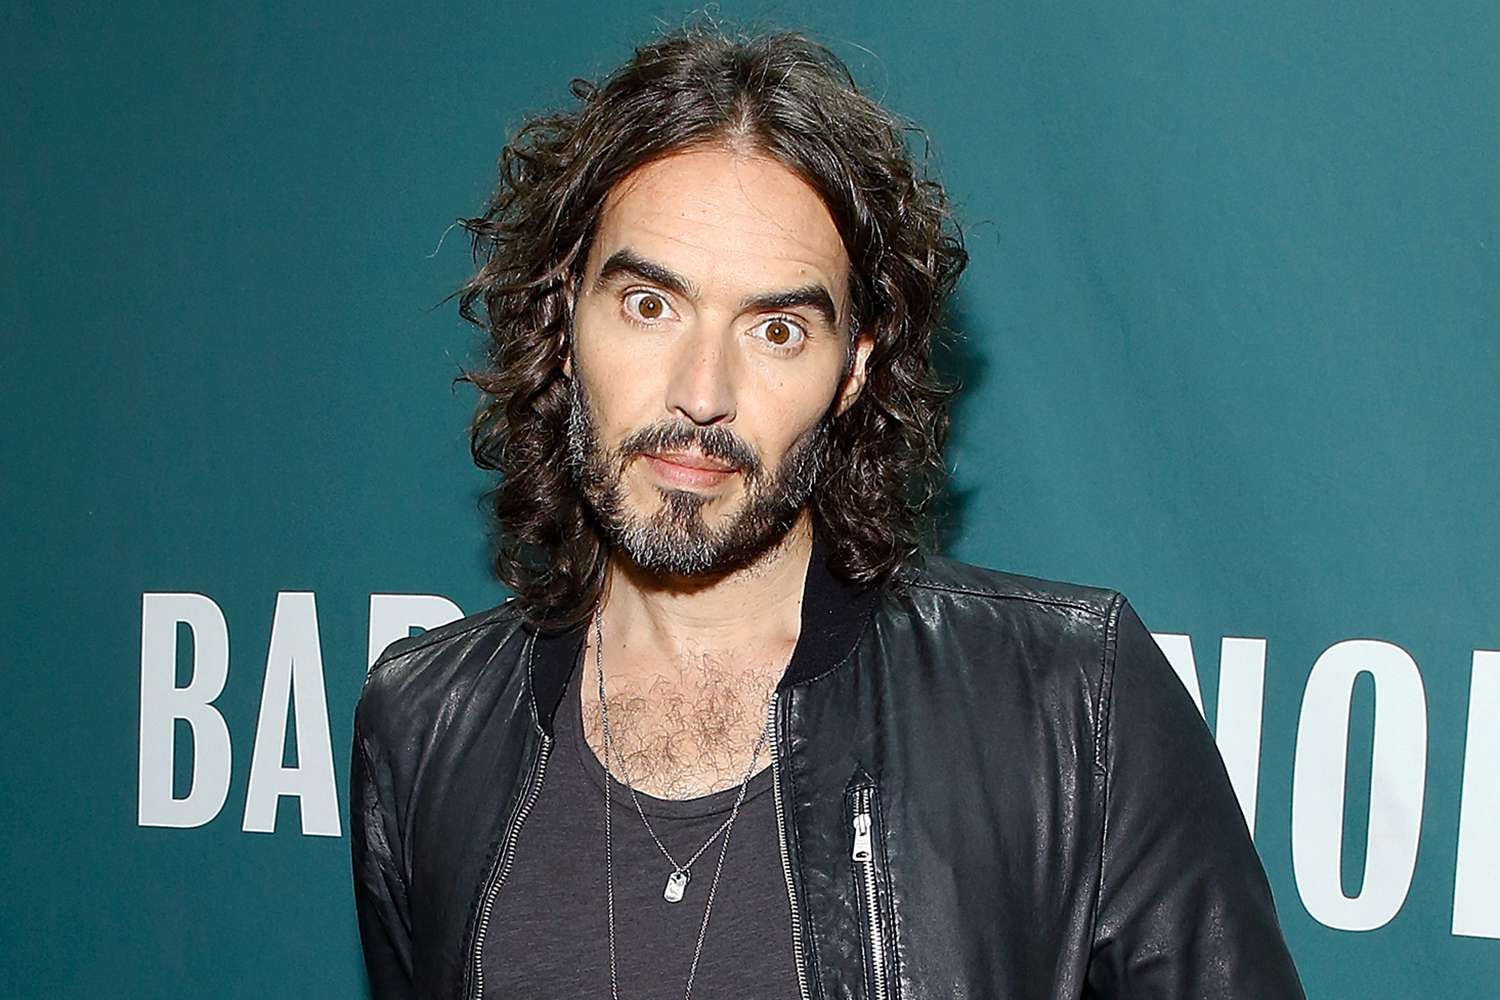 Russell Brand wearing a black jacket